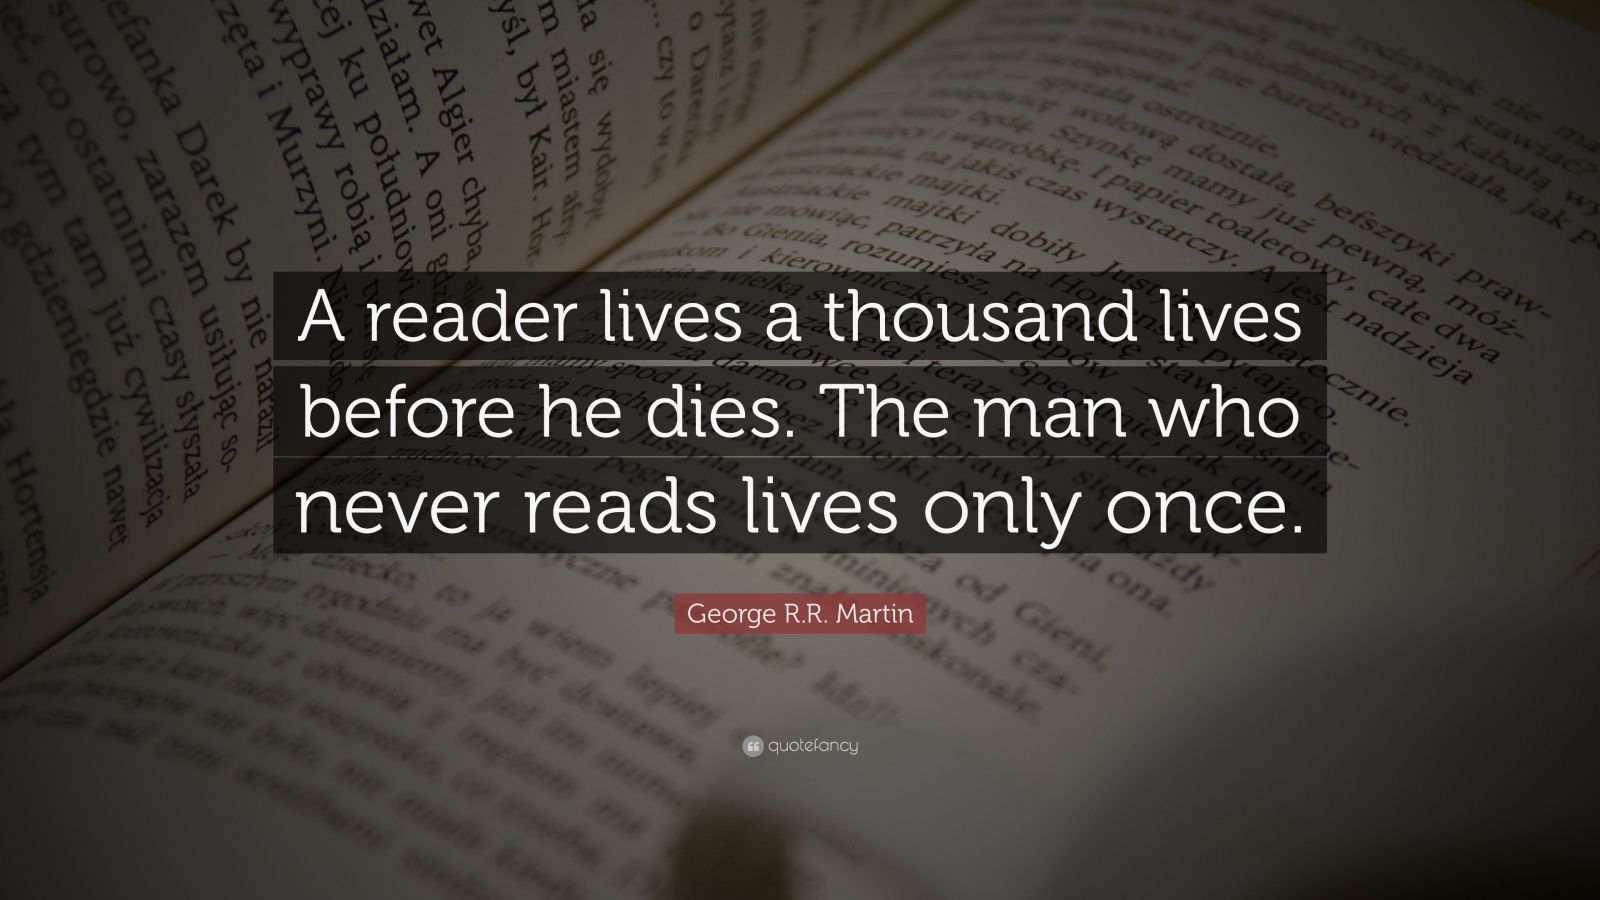 15429 George R R Martin Quote A reader lives a thousand lives before he